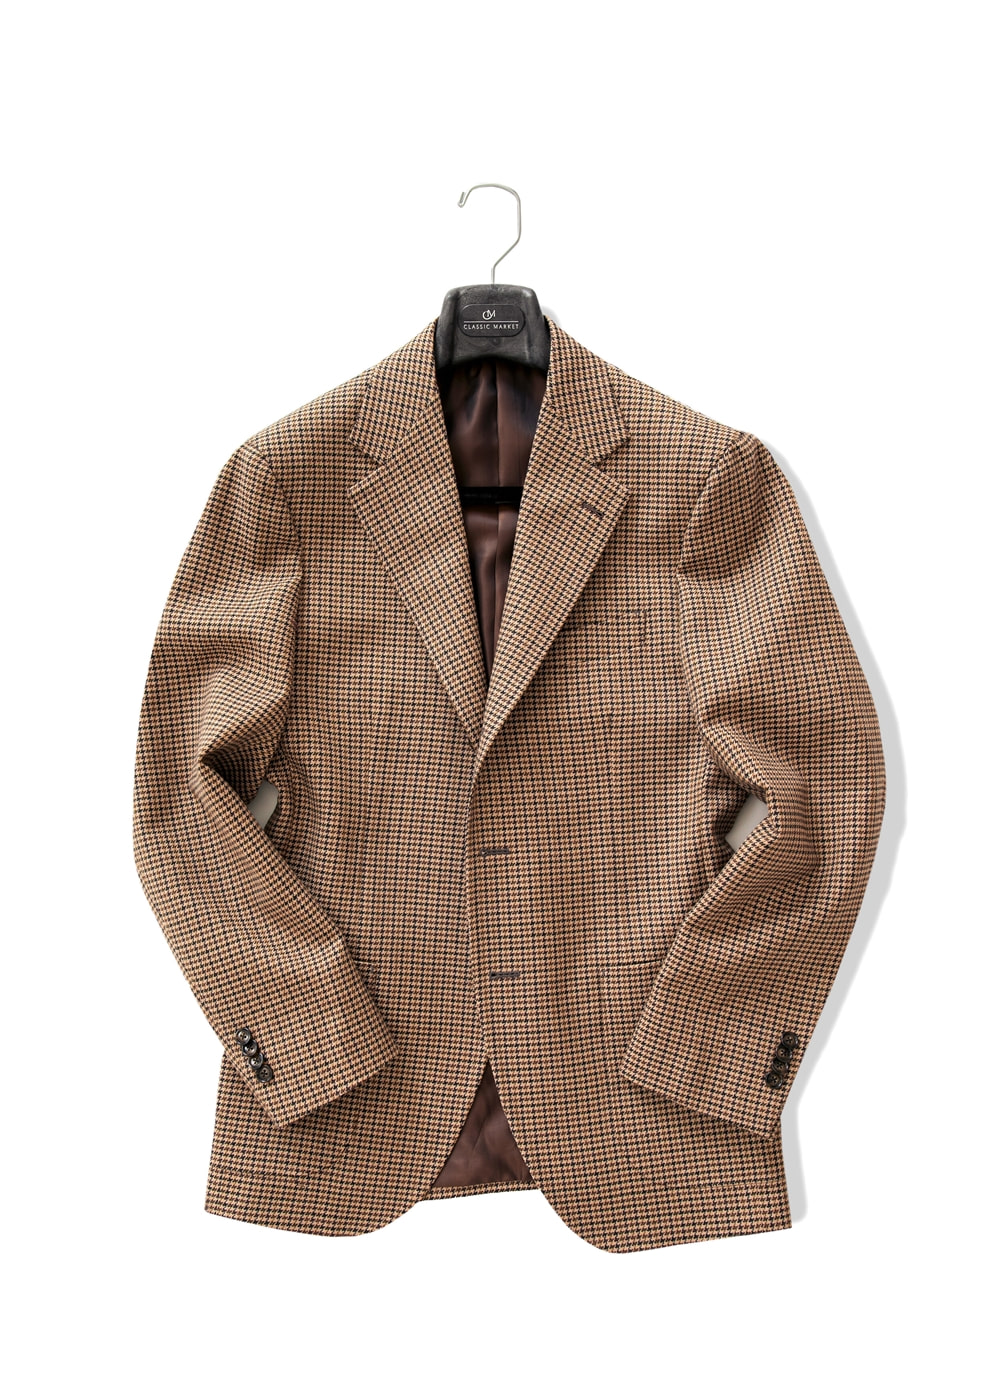 23 S/S SOAVE CH29 - BEIGE(Fabric : ITALY DRAPERS)CLASSIC MARKET(클래식마켓)